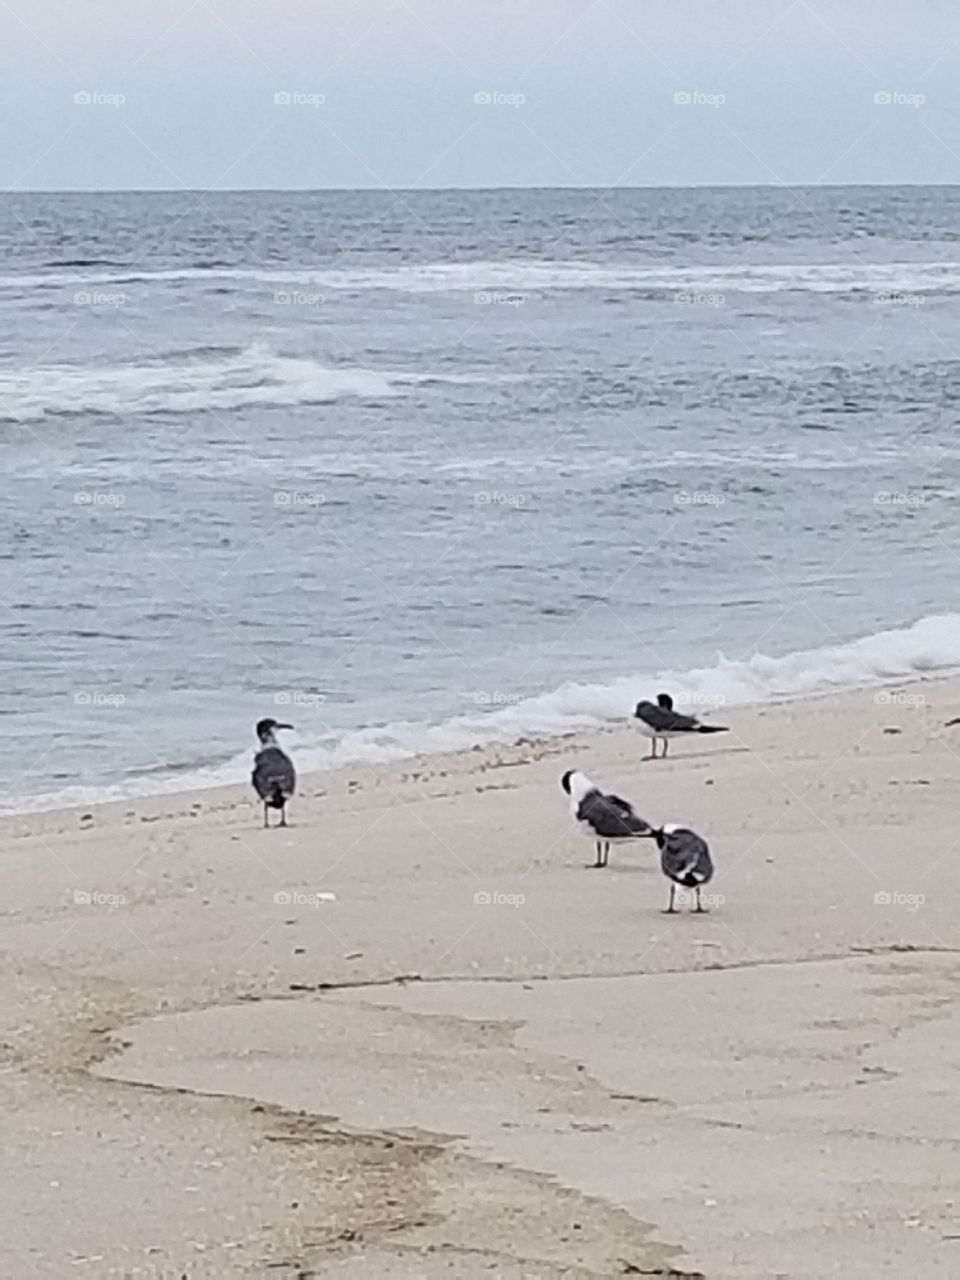 Seagulls at the ocean in New Jersey